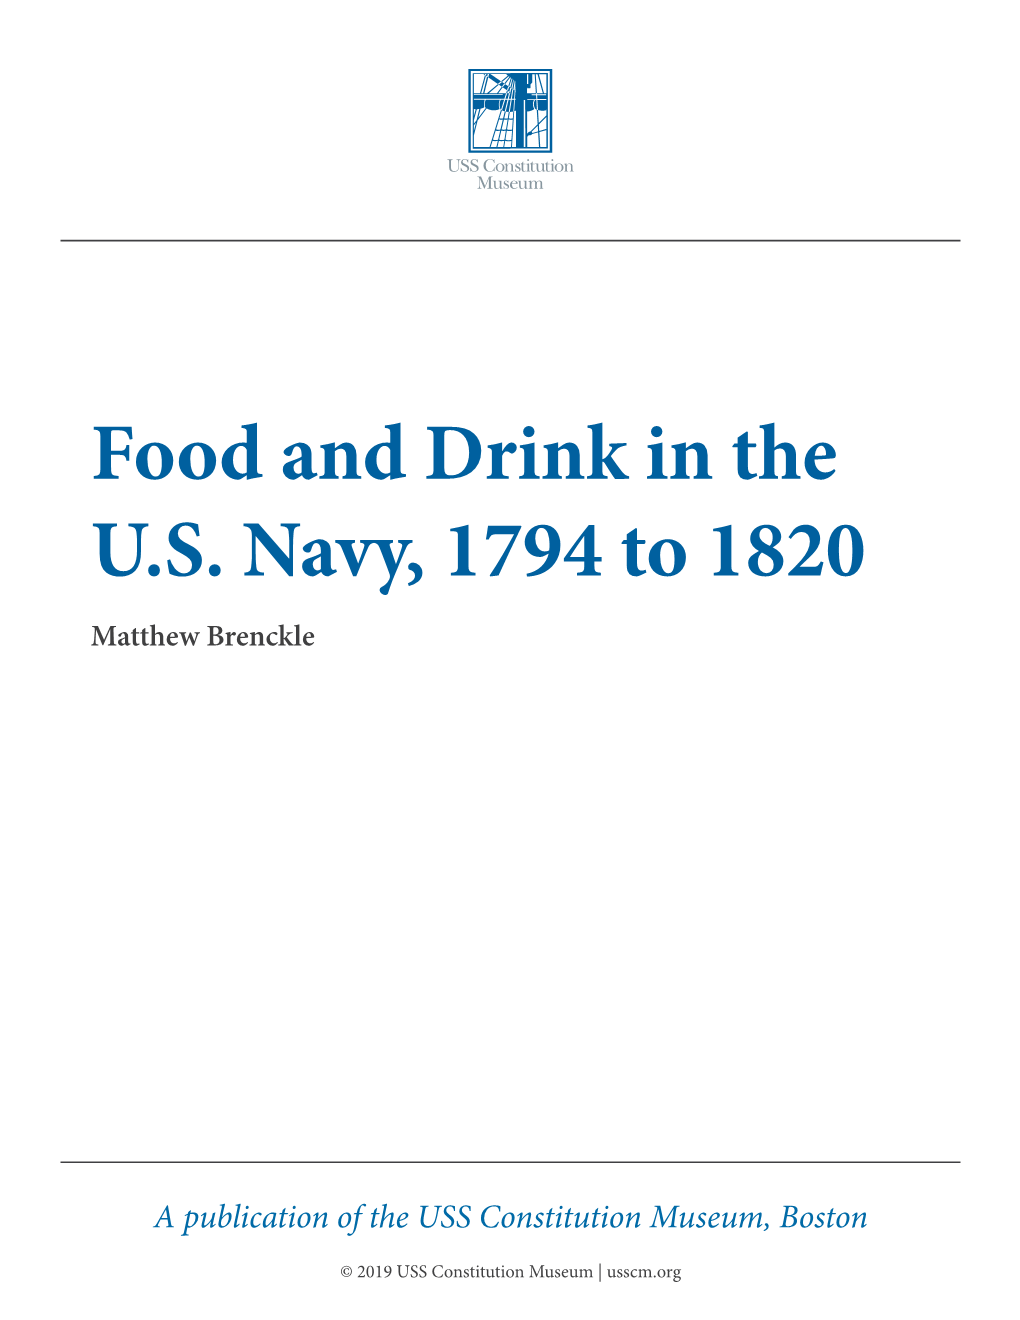 Food and Drink in the U.S. Navy, 1794 to 1820 Matthew Brenckle